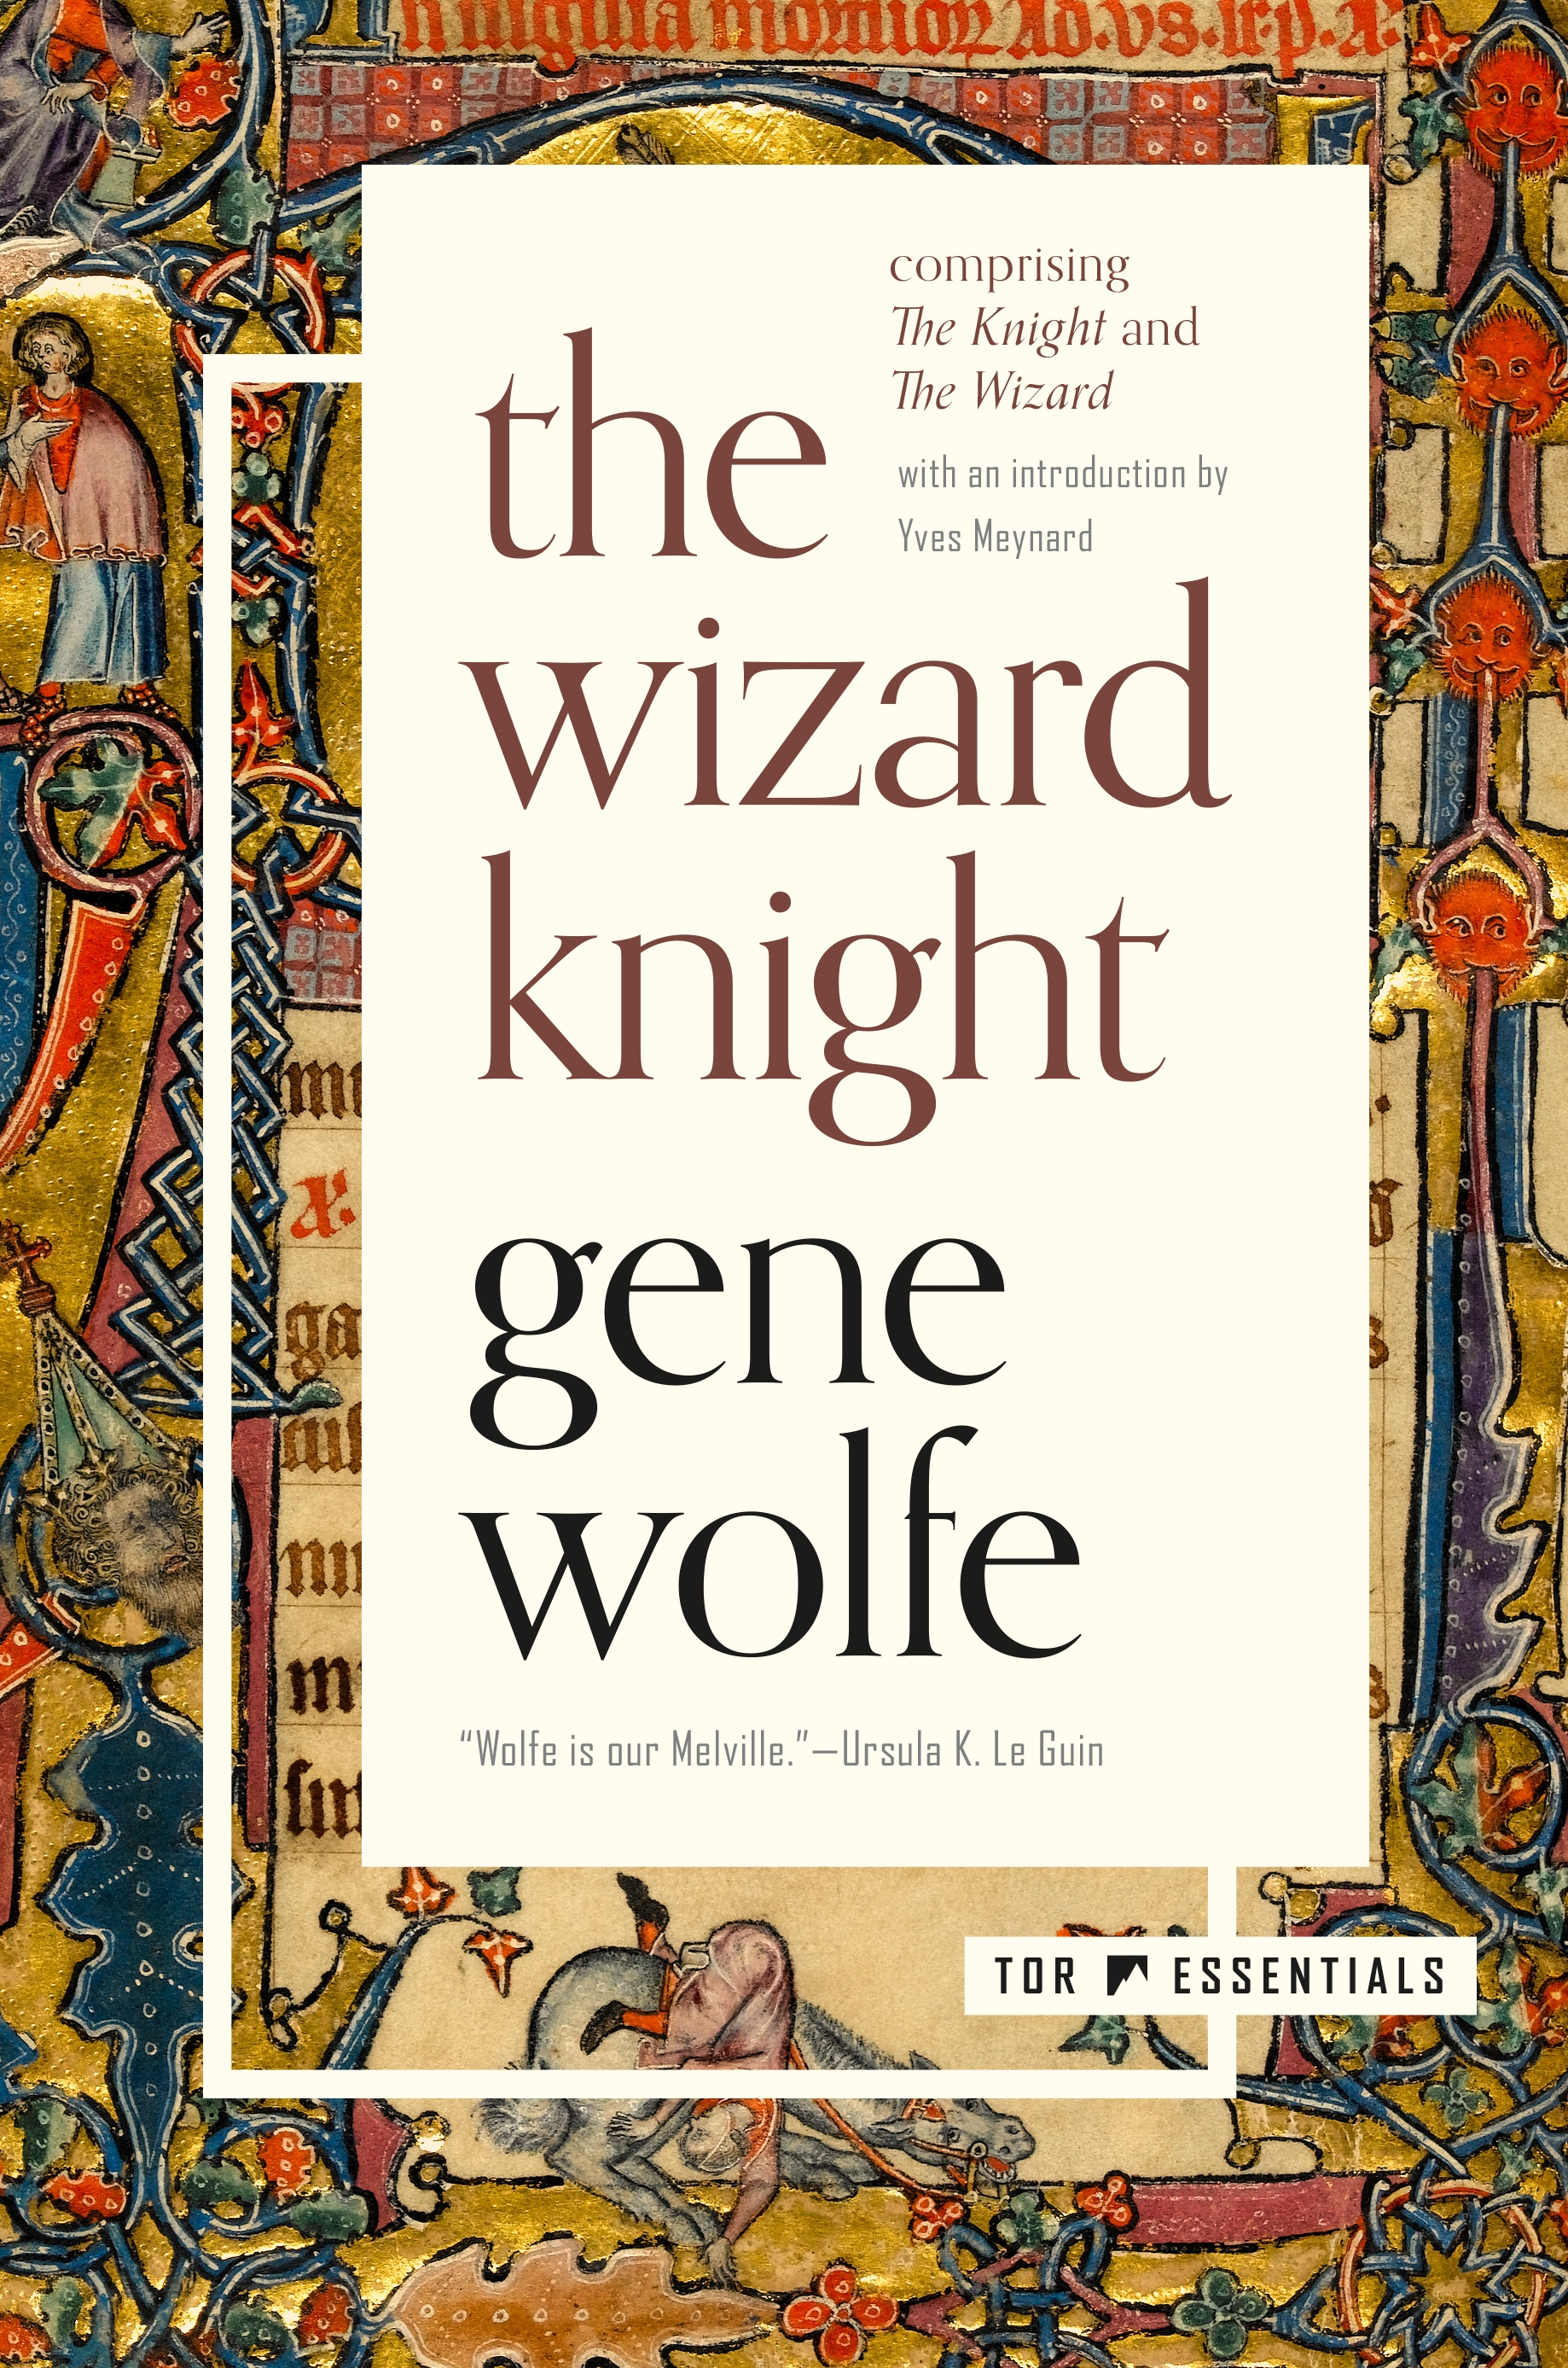 The Wizard Knight : (Comprising The Knight and The Wizard) by Gene Wolfe